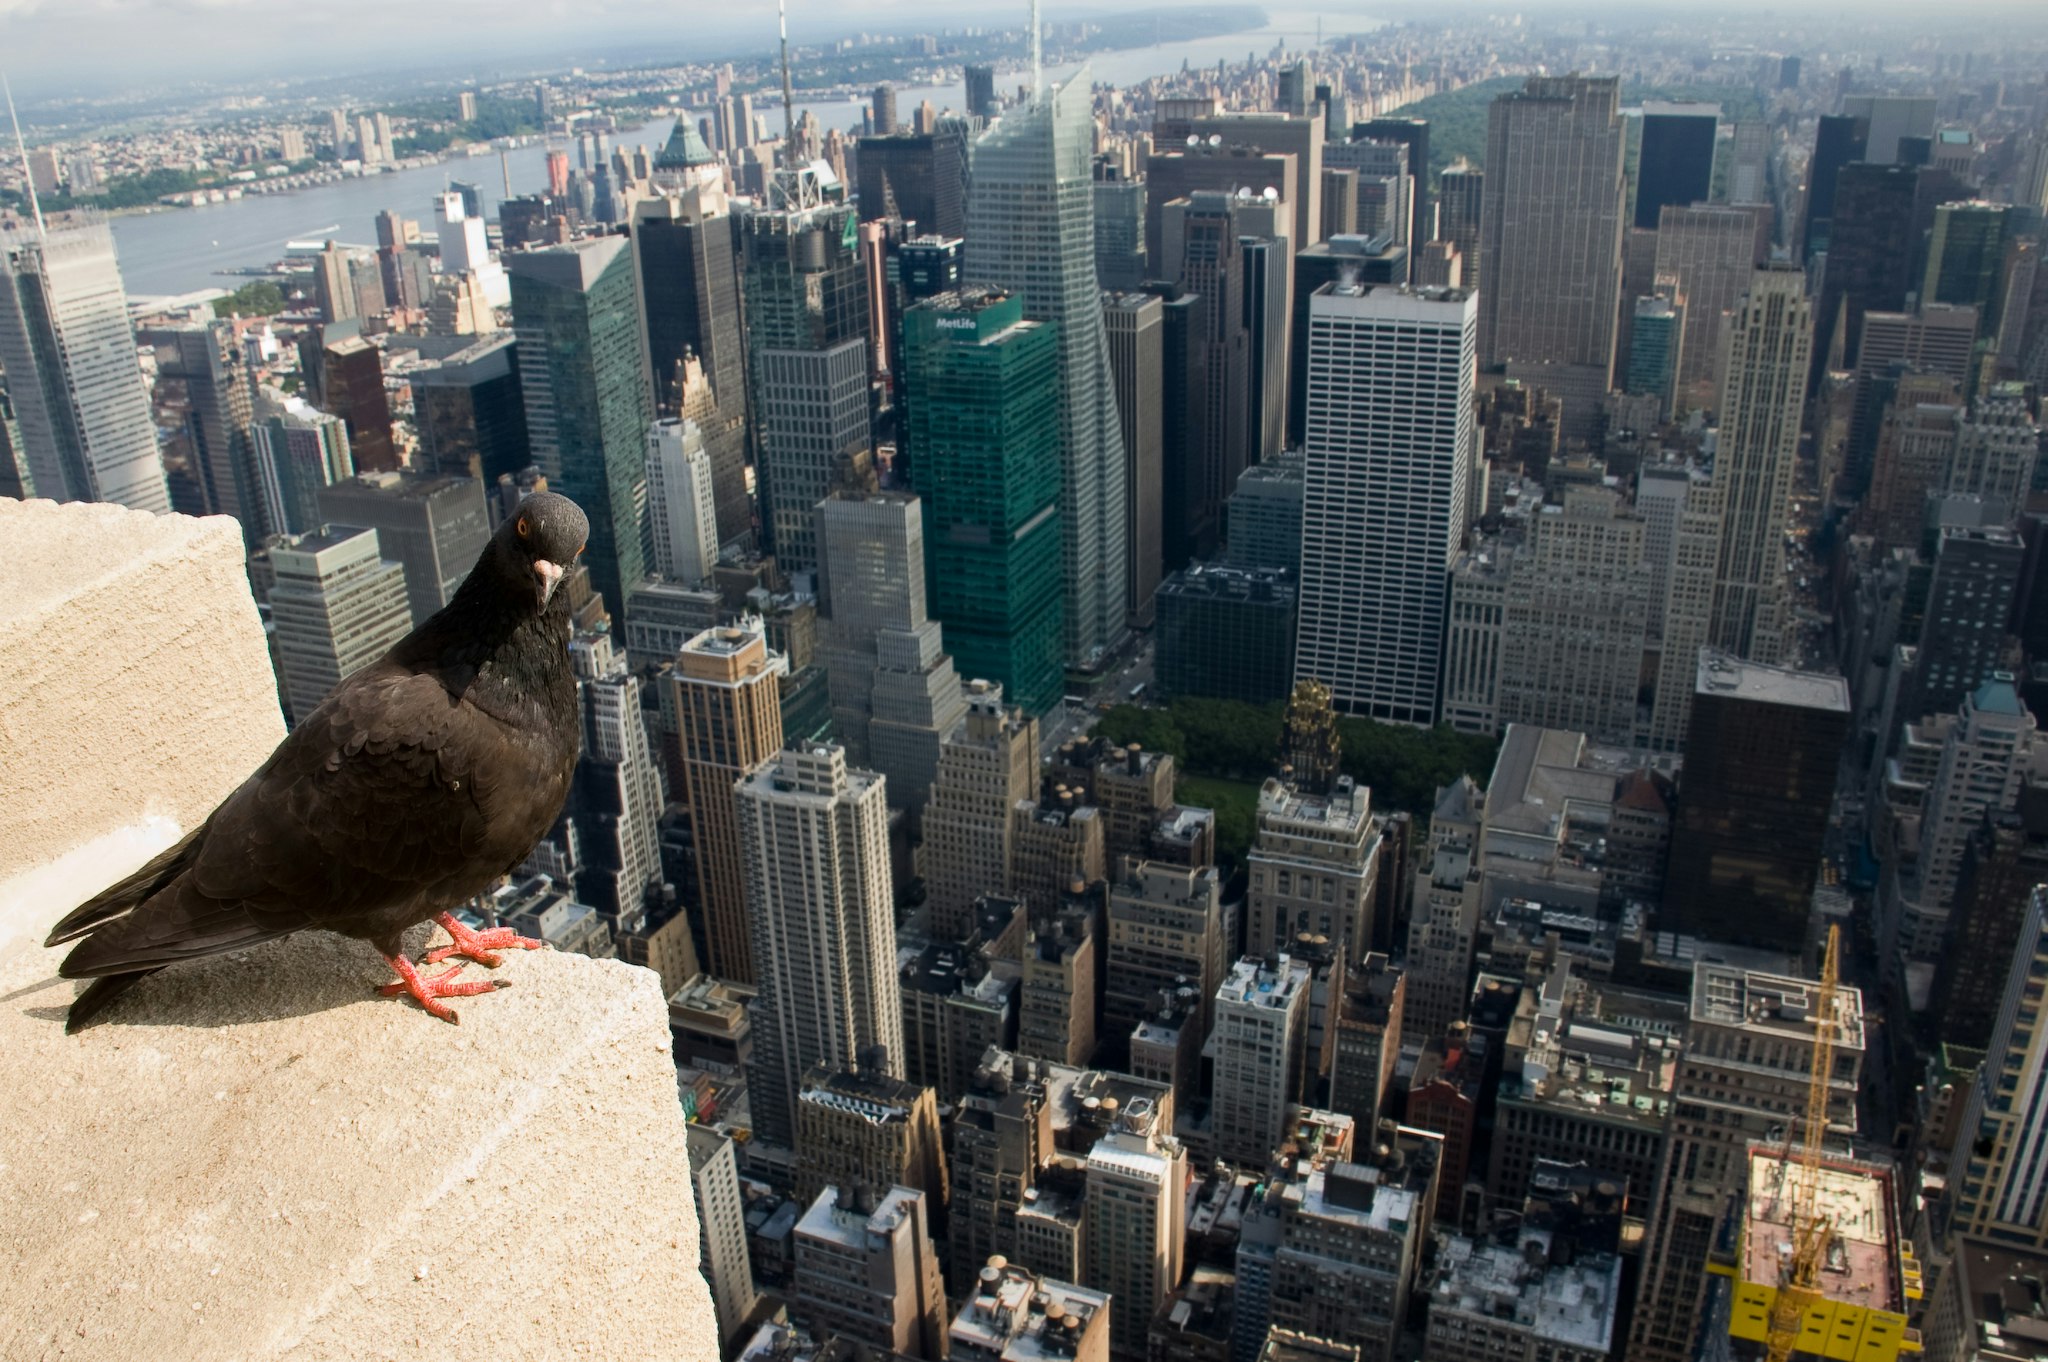 A pigeon overlooks the skyscrapers of New York City